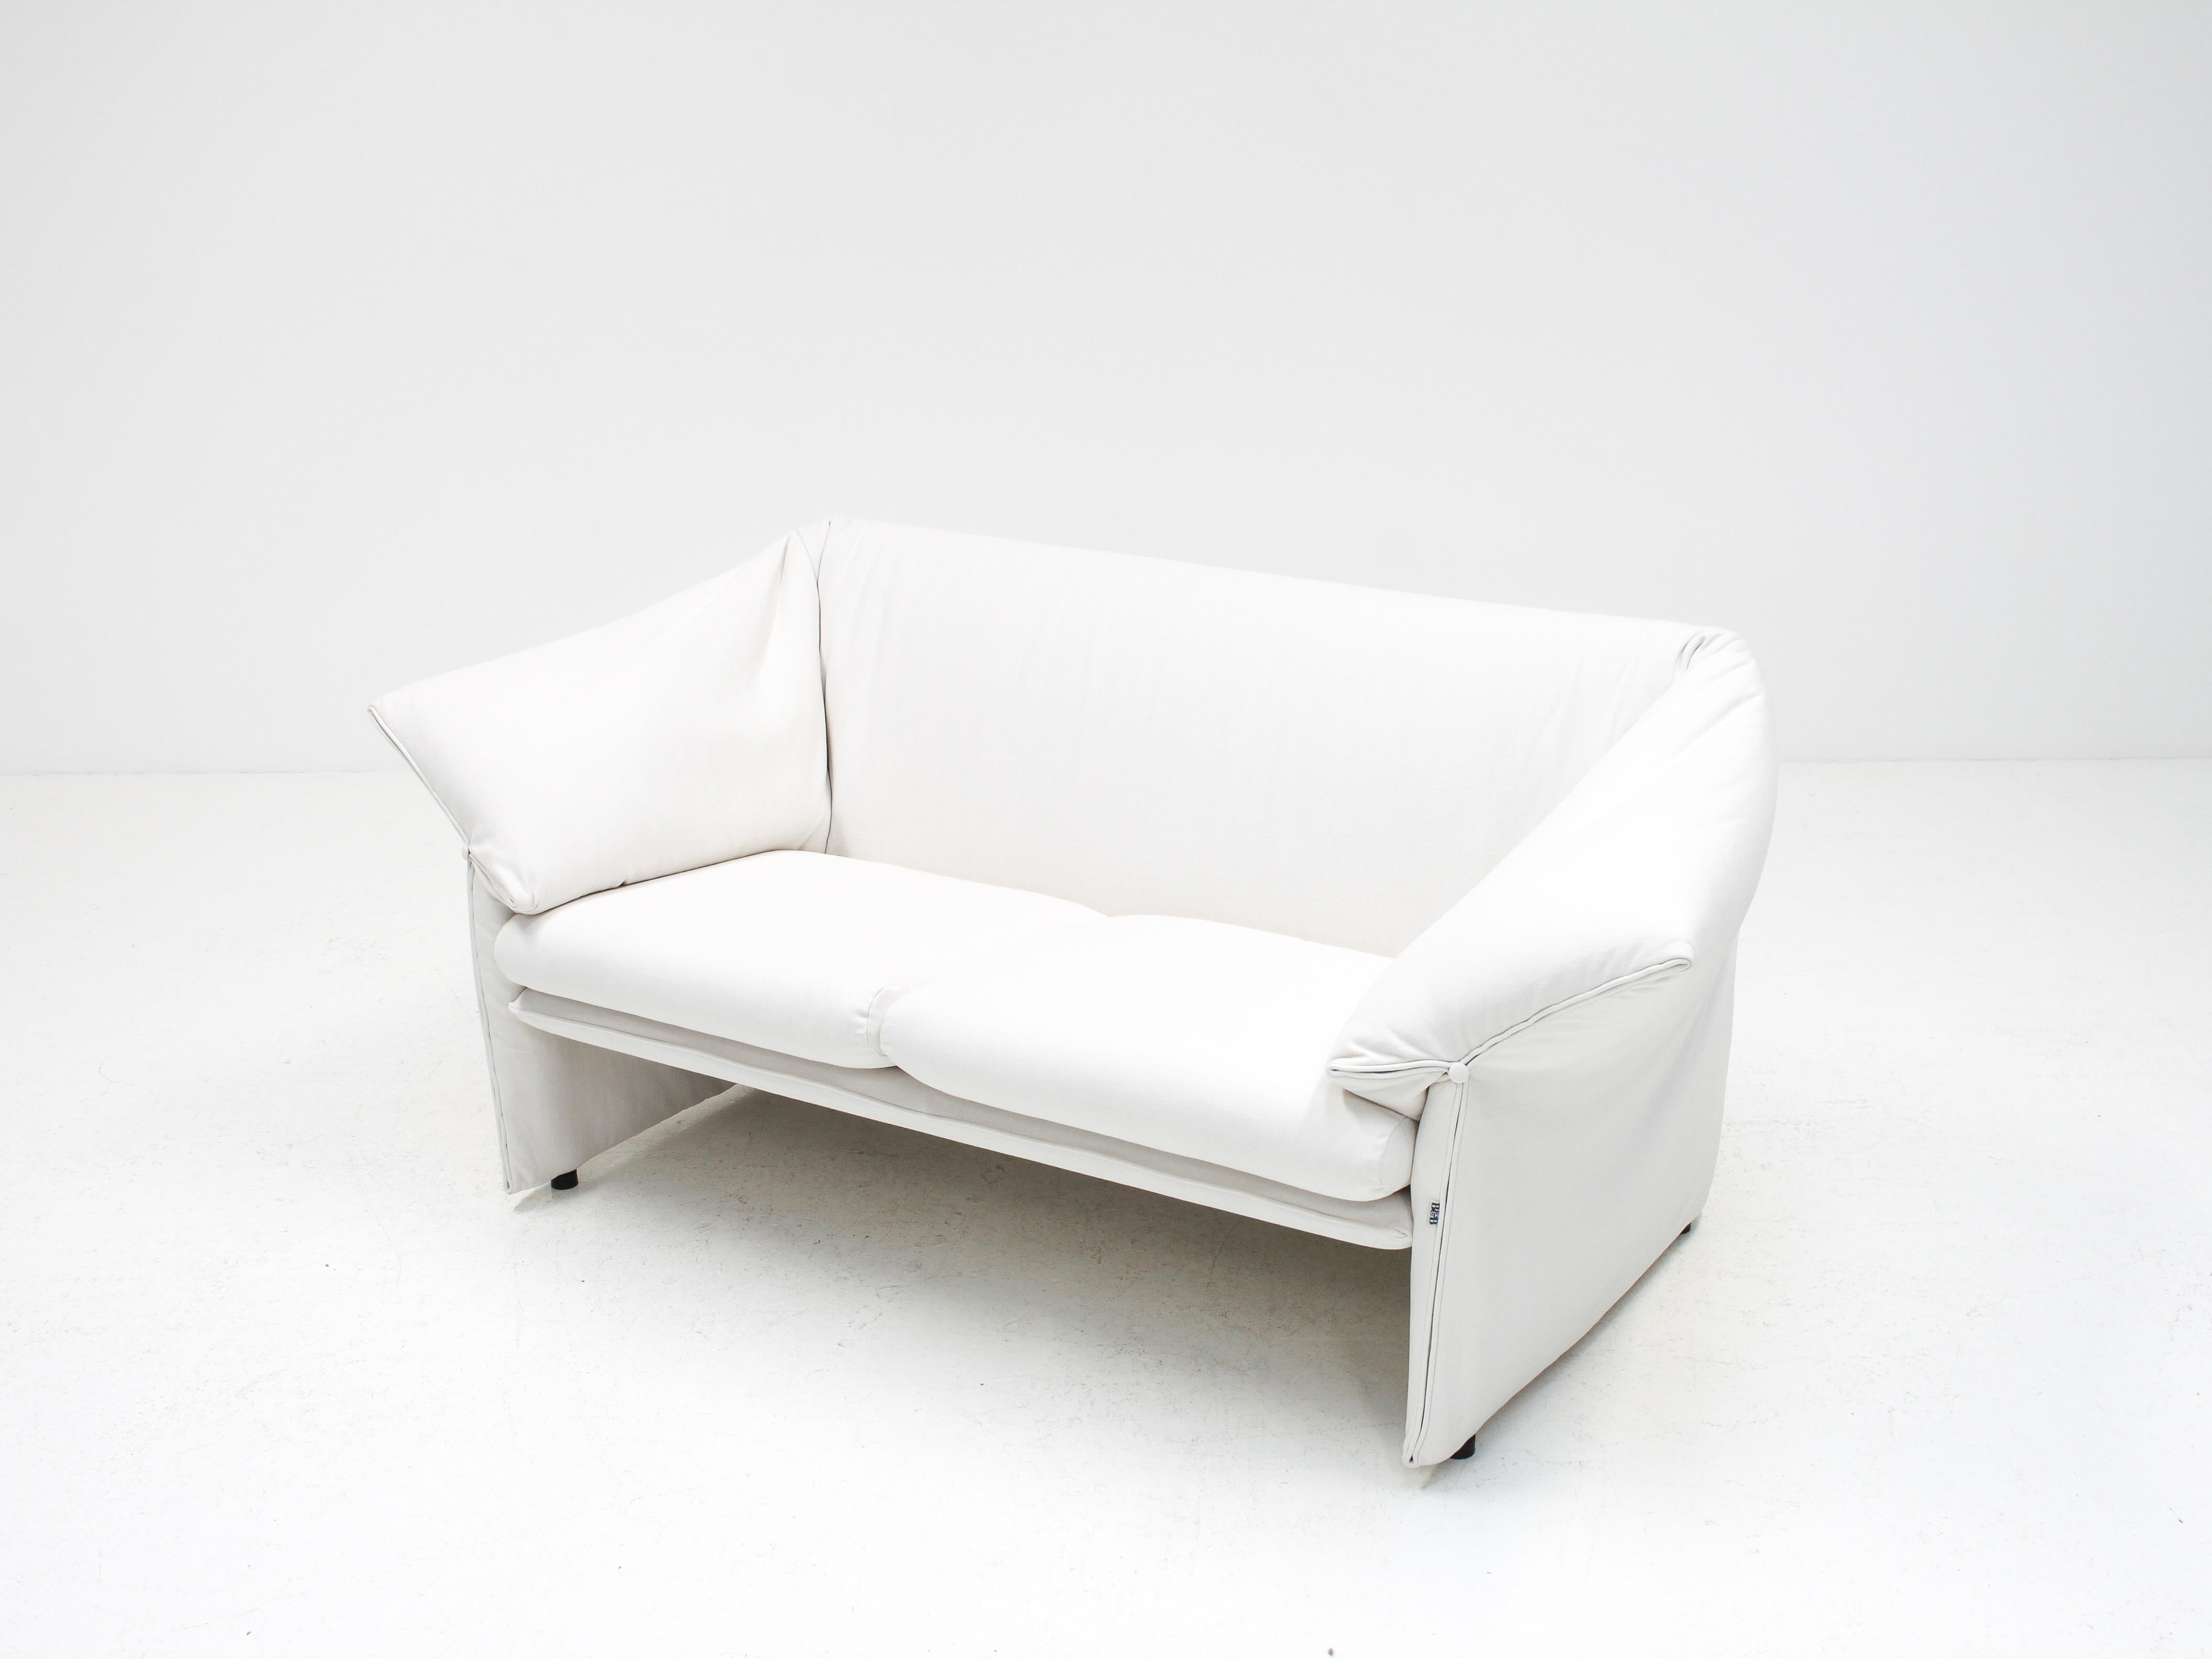  'Le Stelle' Loveseat Sofa by Mario Bellini for B&B Italia, 1974, Reupholstered 9